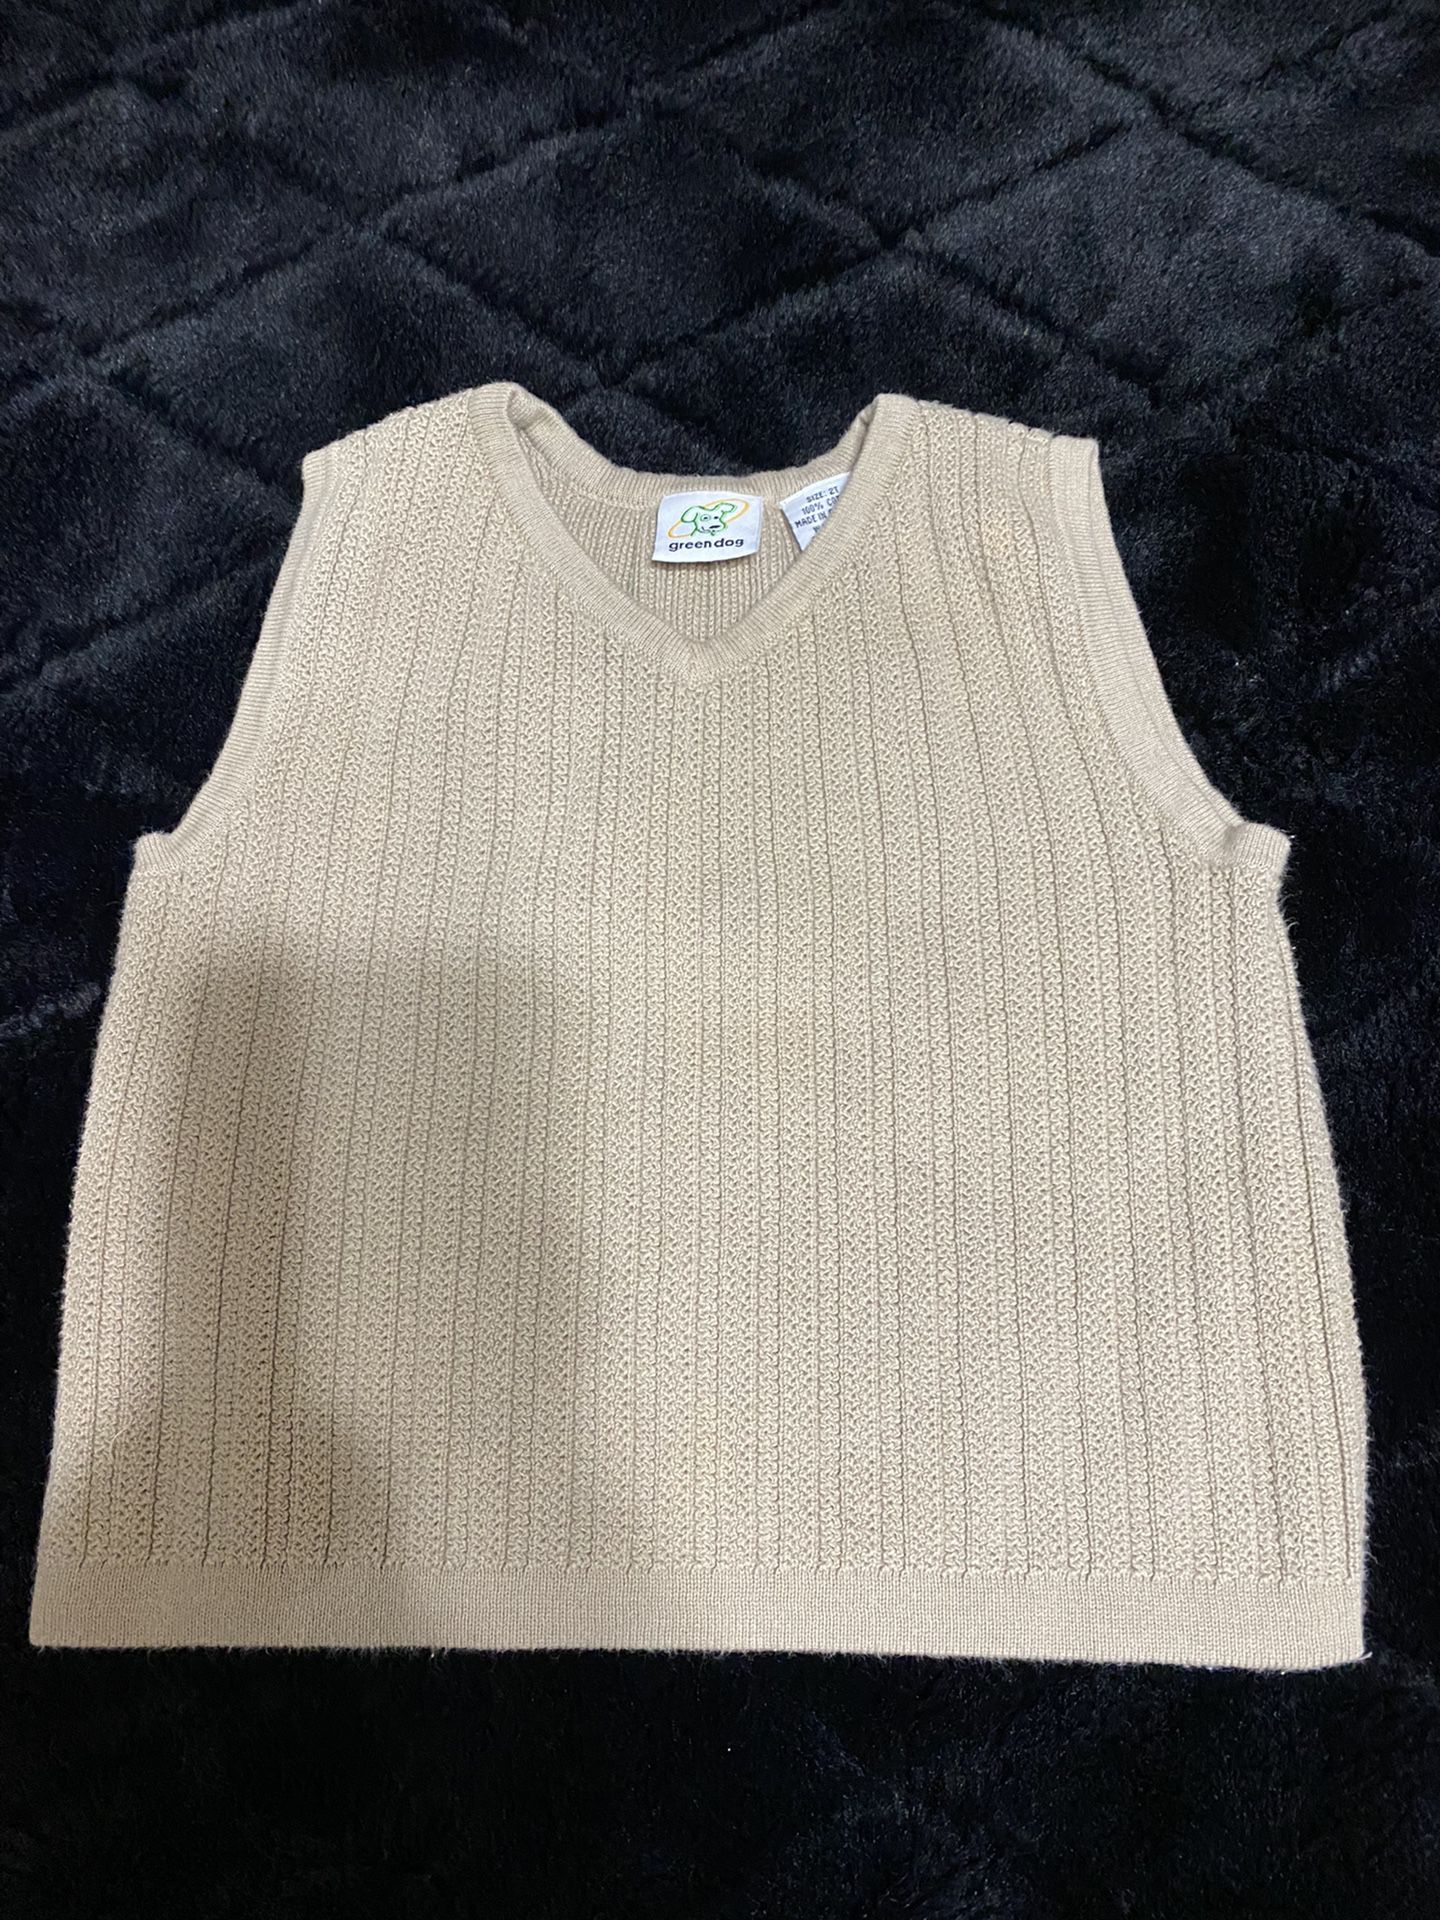 Toddle Sweater Vest USED 